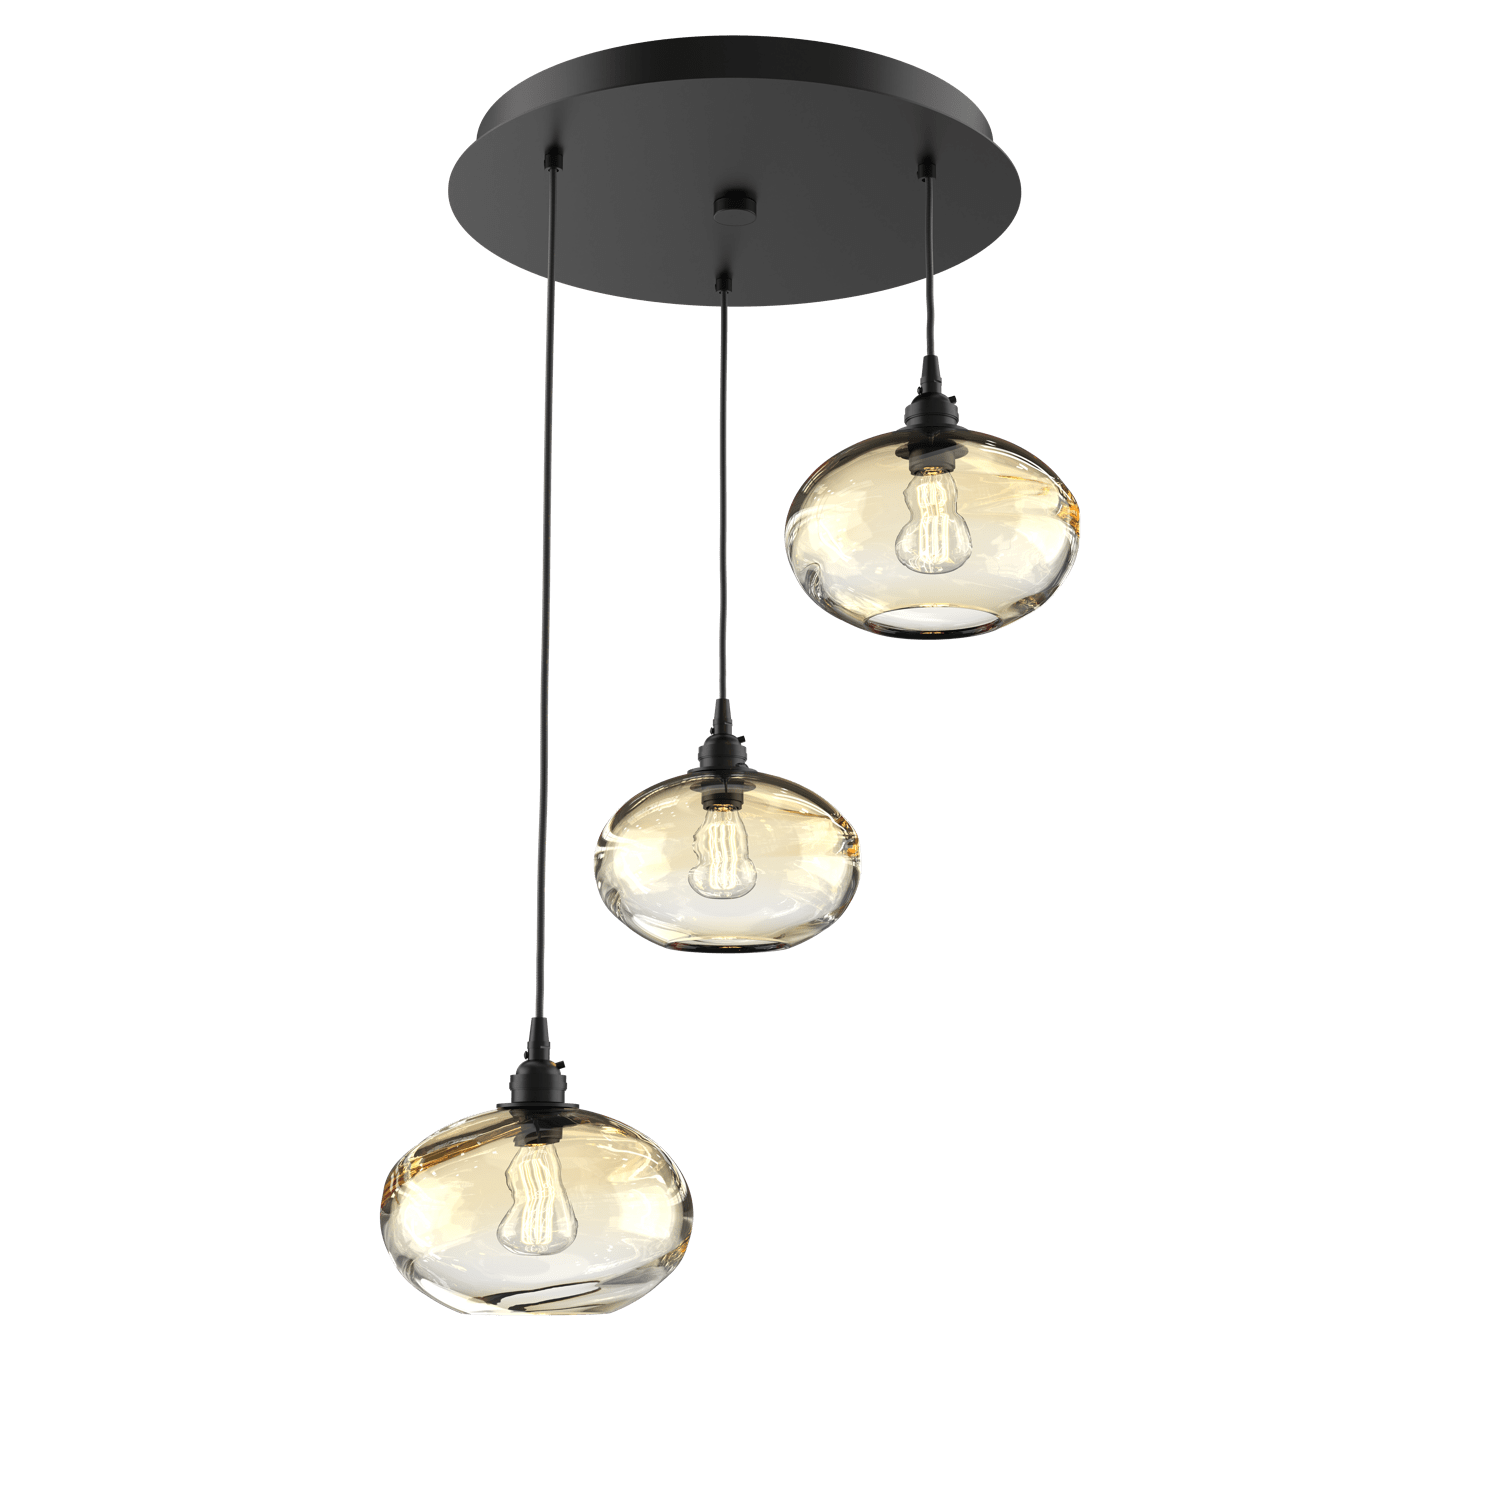 CHB0036-03-MB-OA-Hammerton-Studio-Optic-Blown-Glass-Coppa-3-light-round-pendant-chandelier-with-matte-black-finish-and-optic-amber-blown-glass-shades-and-incandescent-lamping